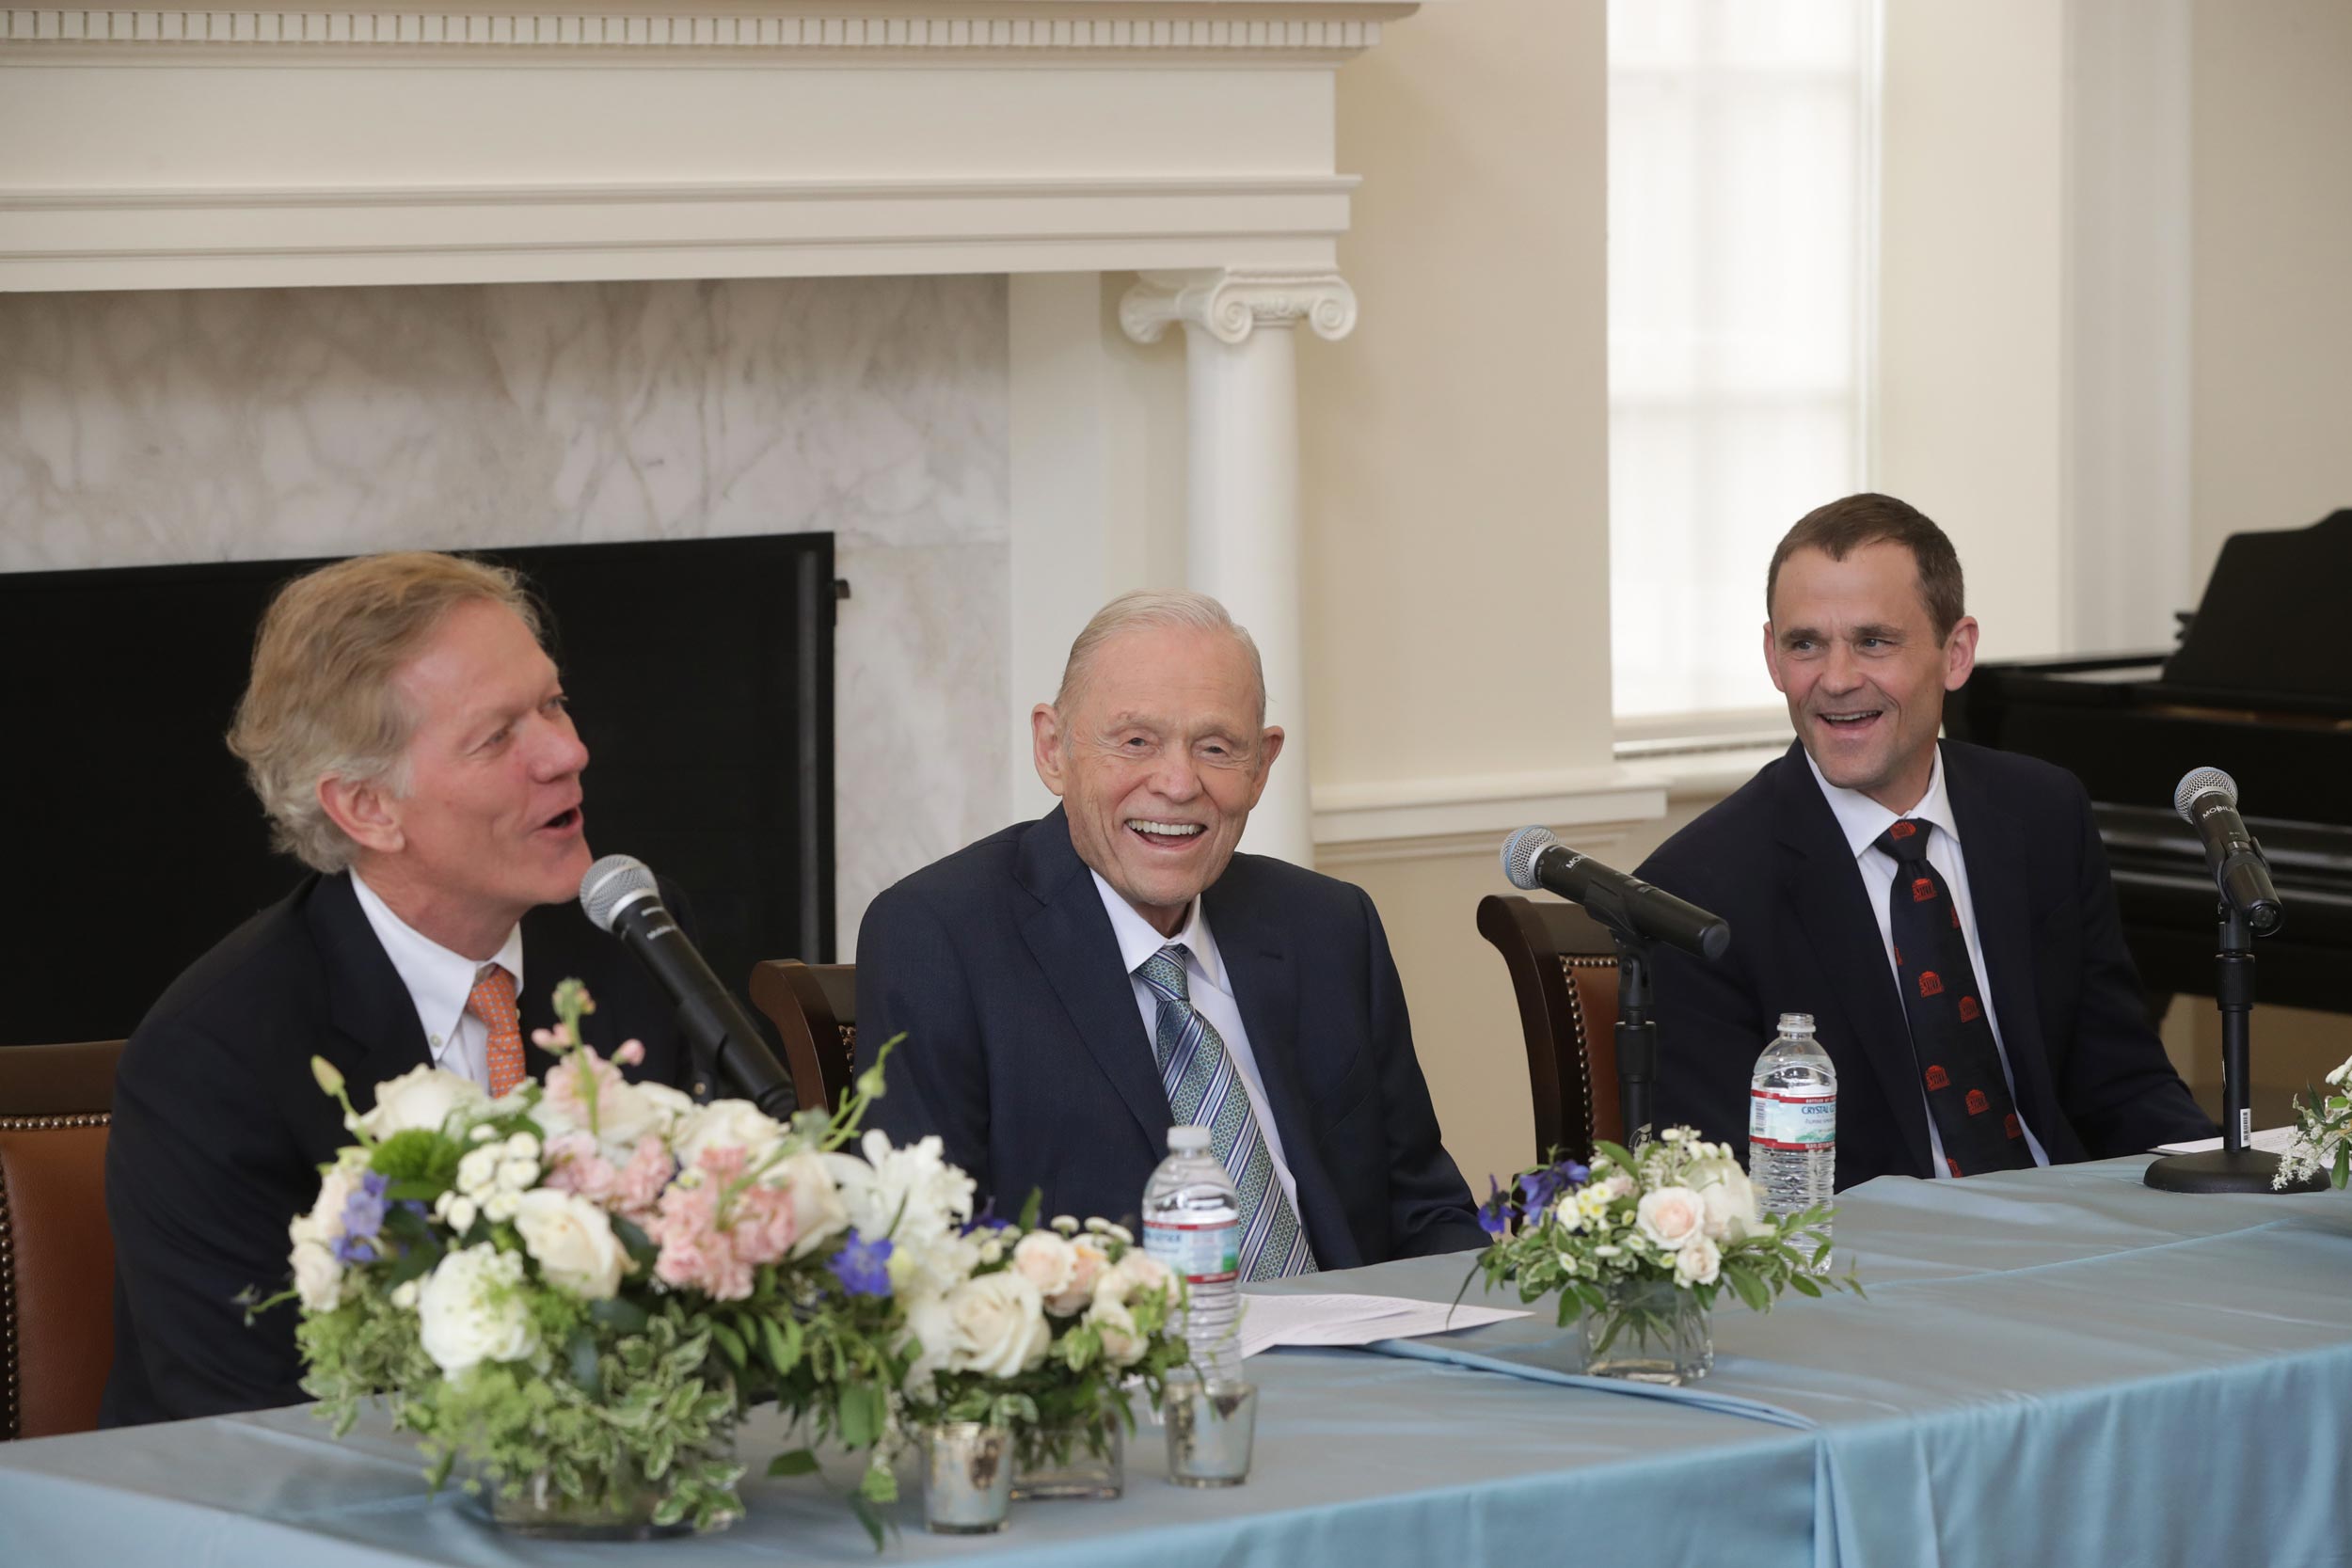 Scott Beardsley, left, Frank M. Sands Sr. and President Jim Ryan sit at a table talking and laughing